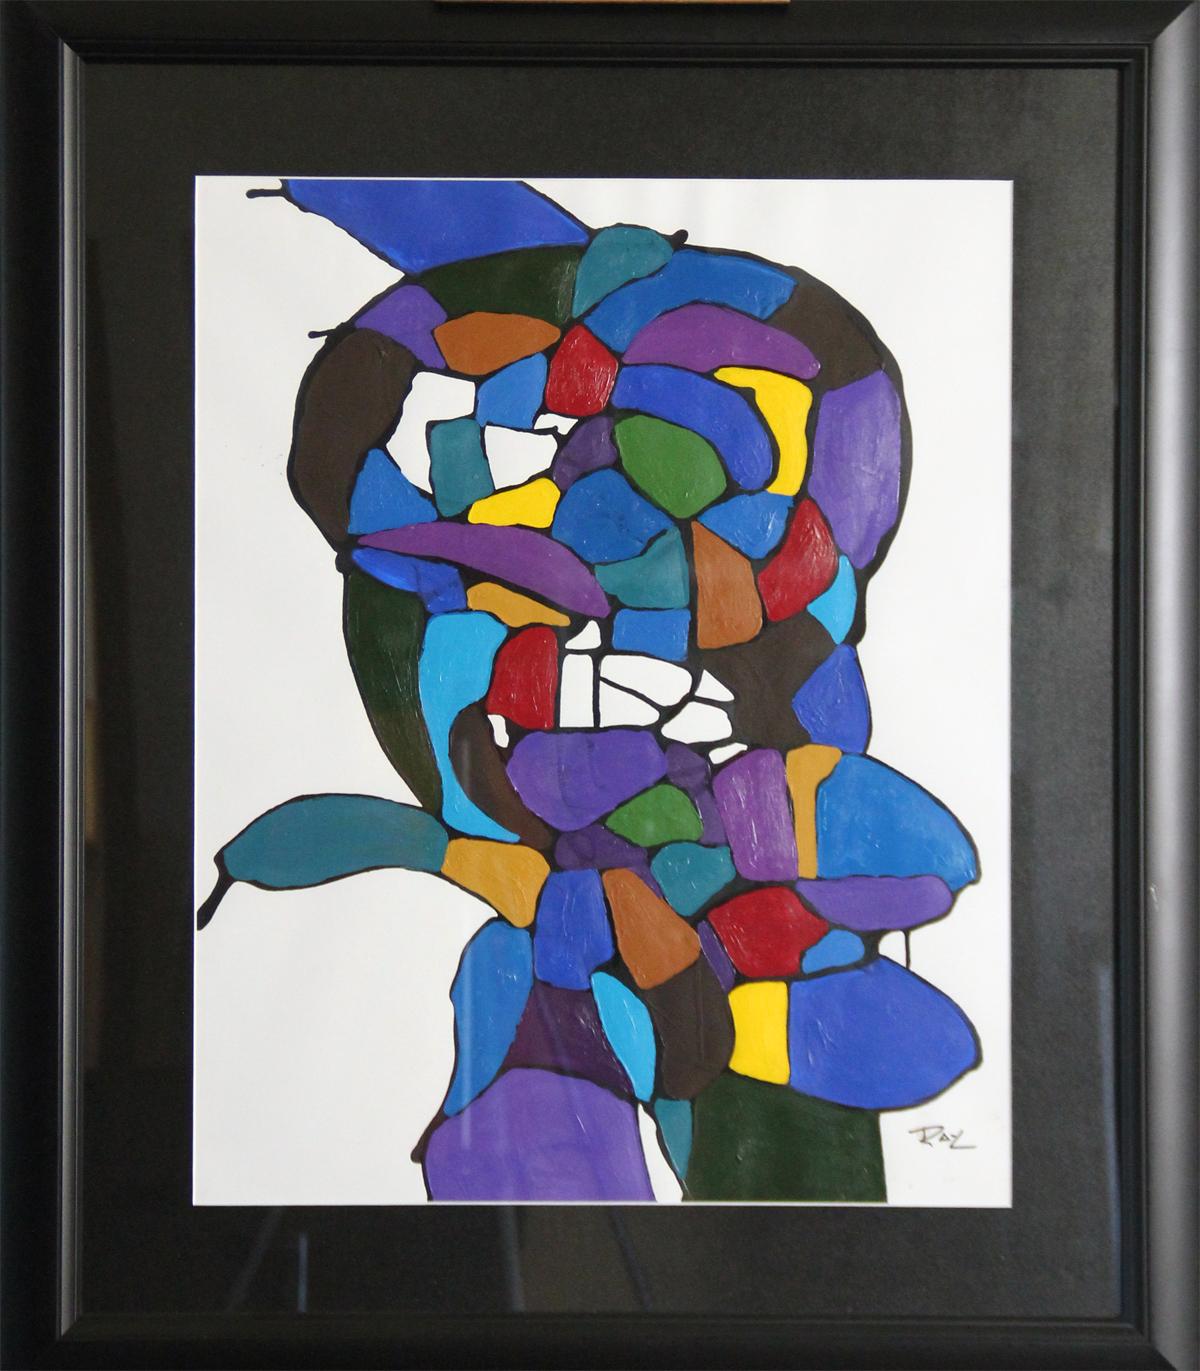 Tidy Slapper, Figurative Abstraction, Acrylic on Paper, Modernist Abstract, 1995 - Painting by Ray Leight